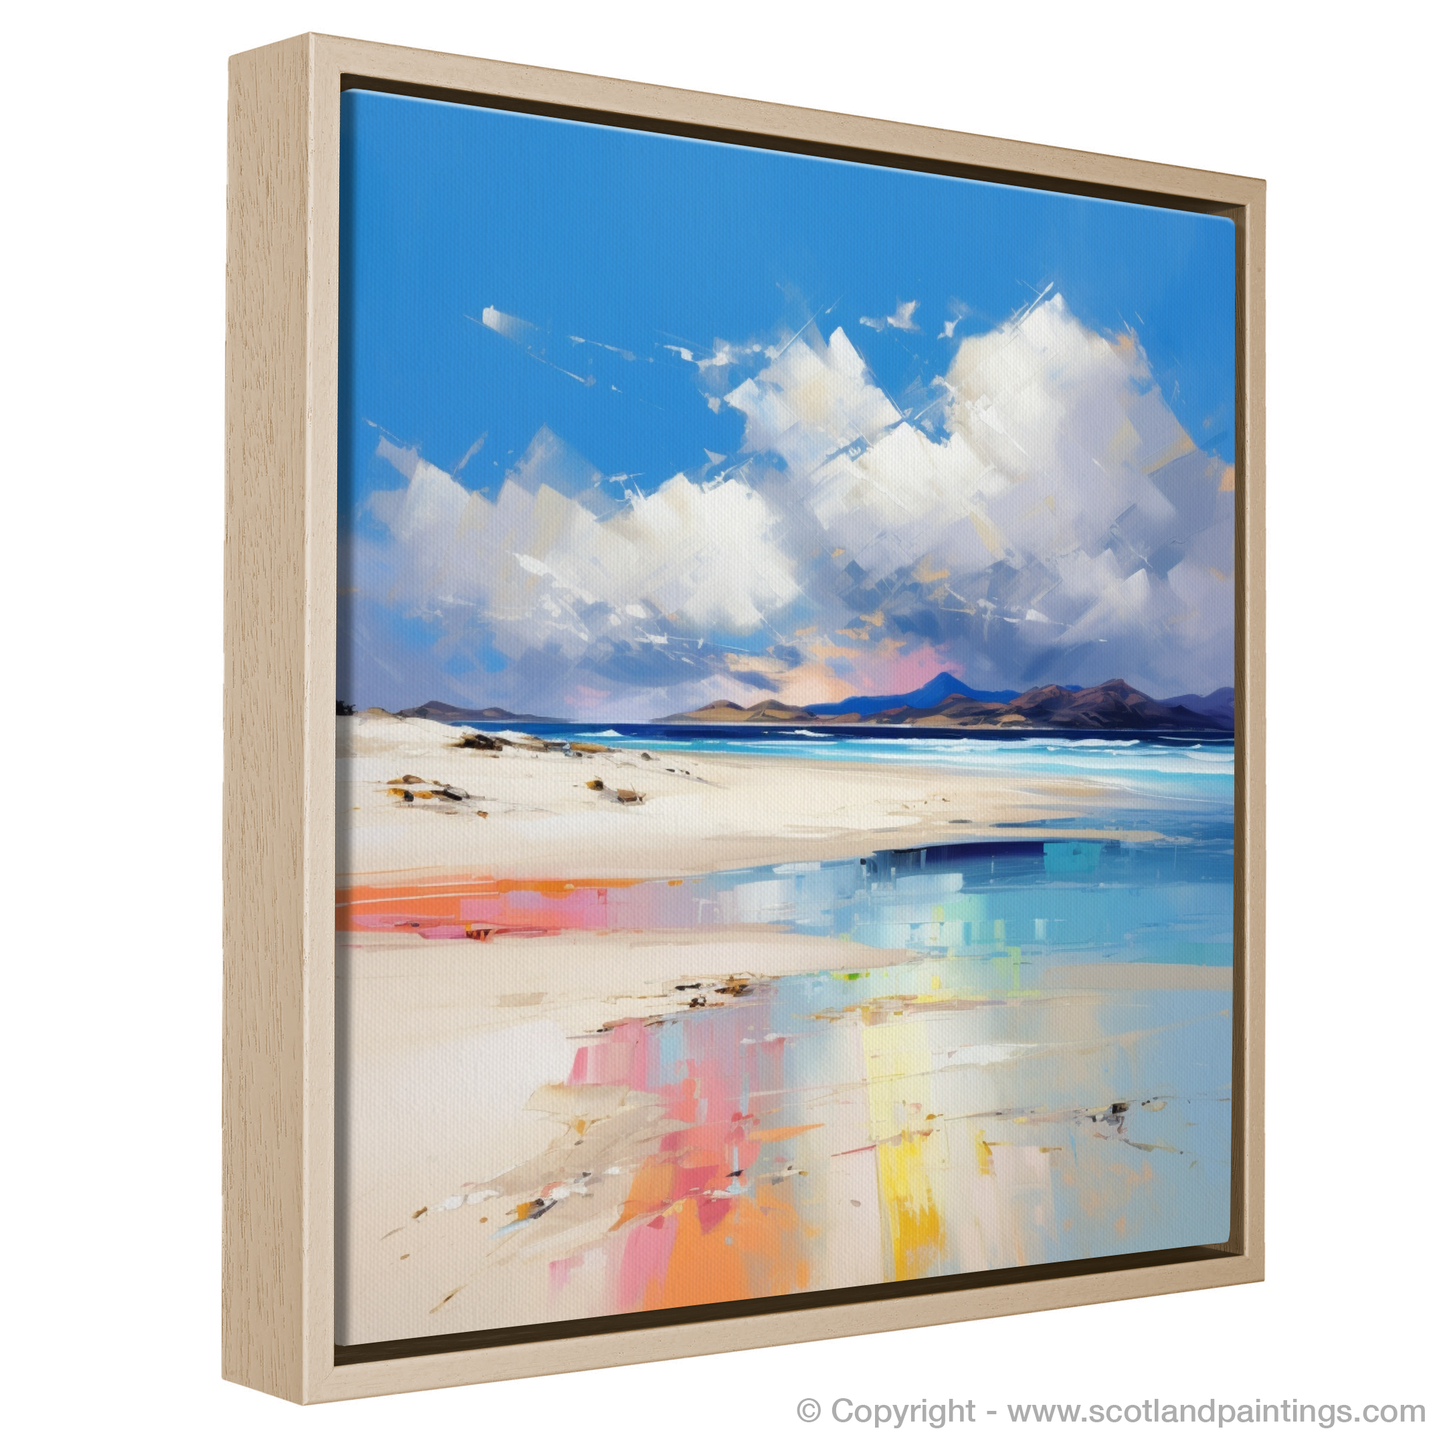 Painting and Art Print of Luskentyre Beach, Isle of Harris entitled "Luskentyre Beach: An Expressionist Ode to Scottish Serenity".